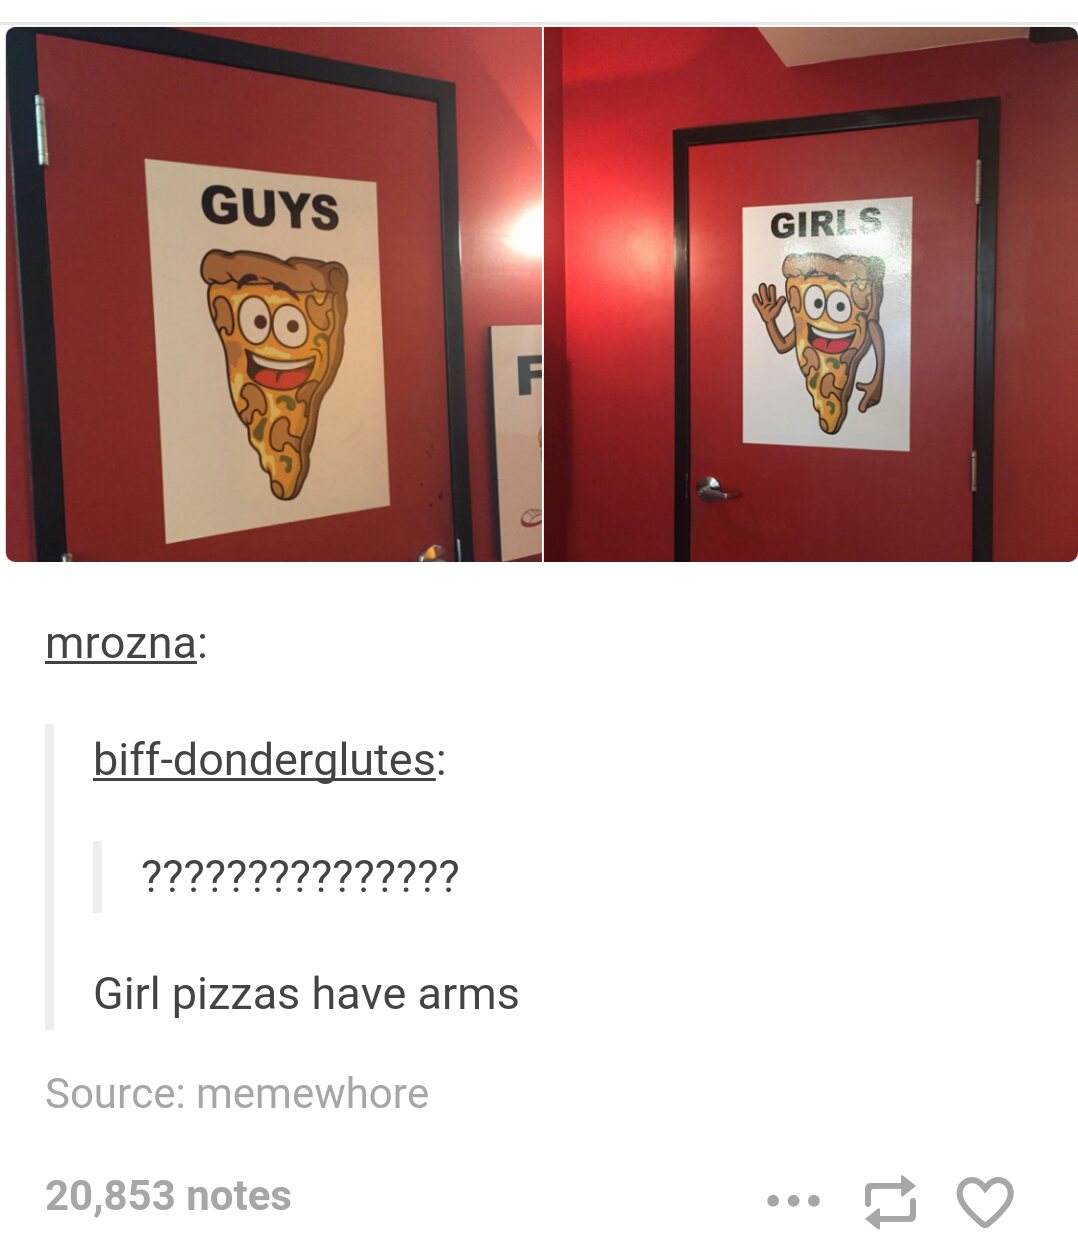 girl pizzas have arms - Guys Girls mrozna biffdonderglutes ??????????????? Girl pizzas have arms Source memewhore 20,853 notes ...